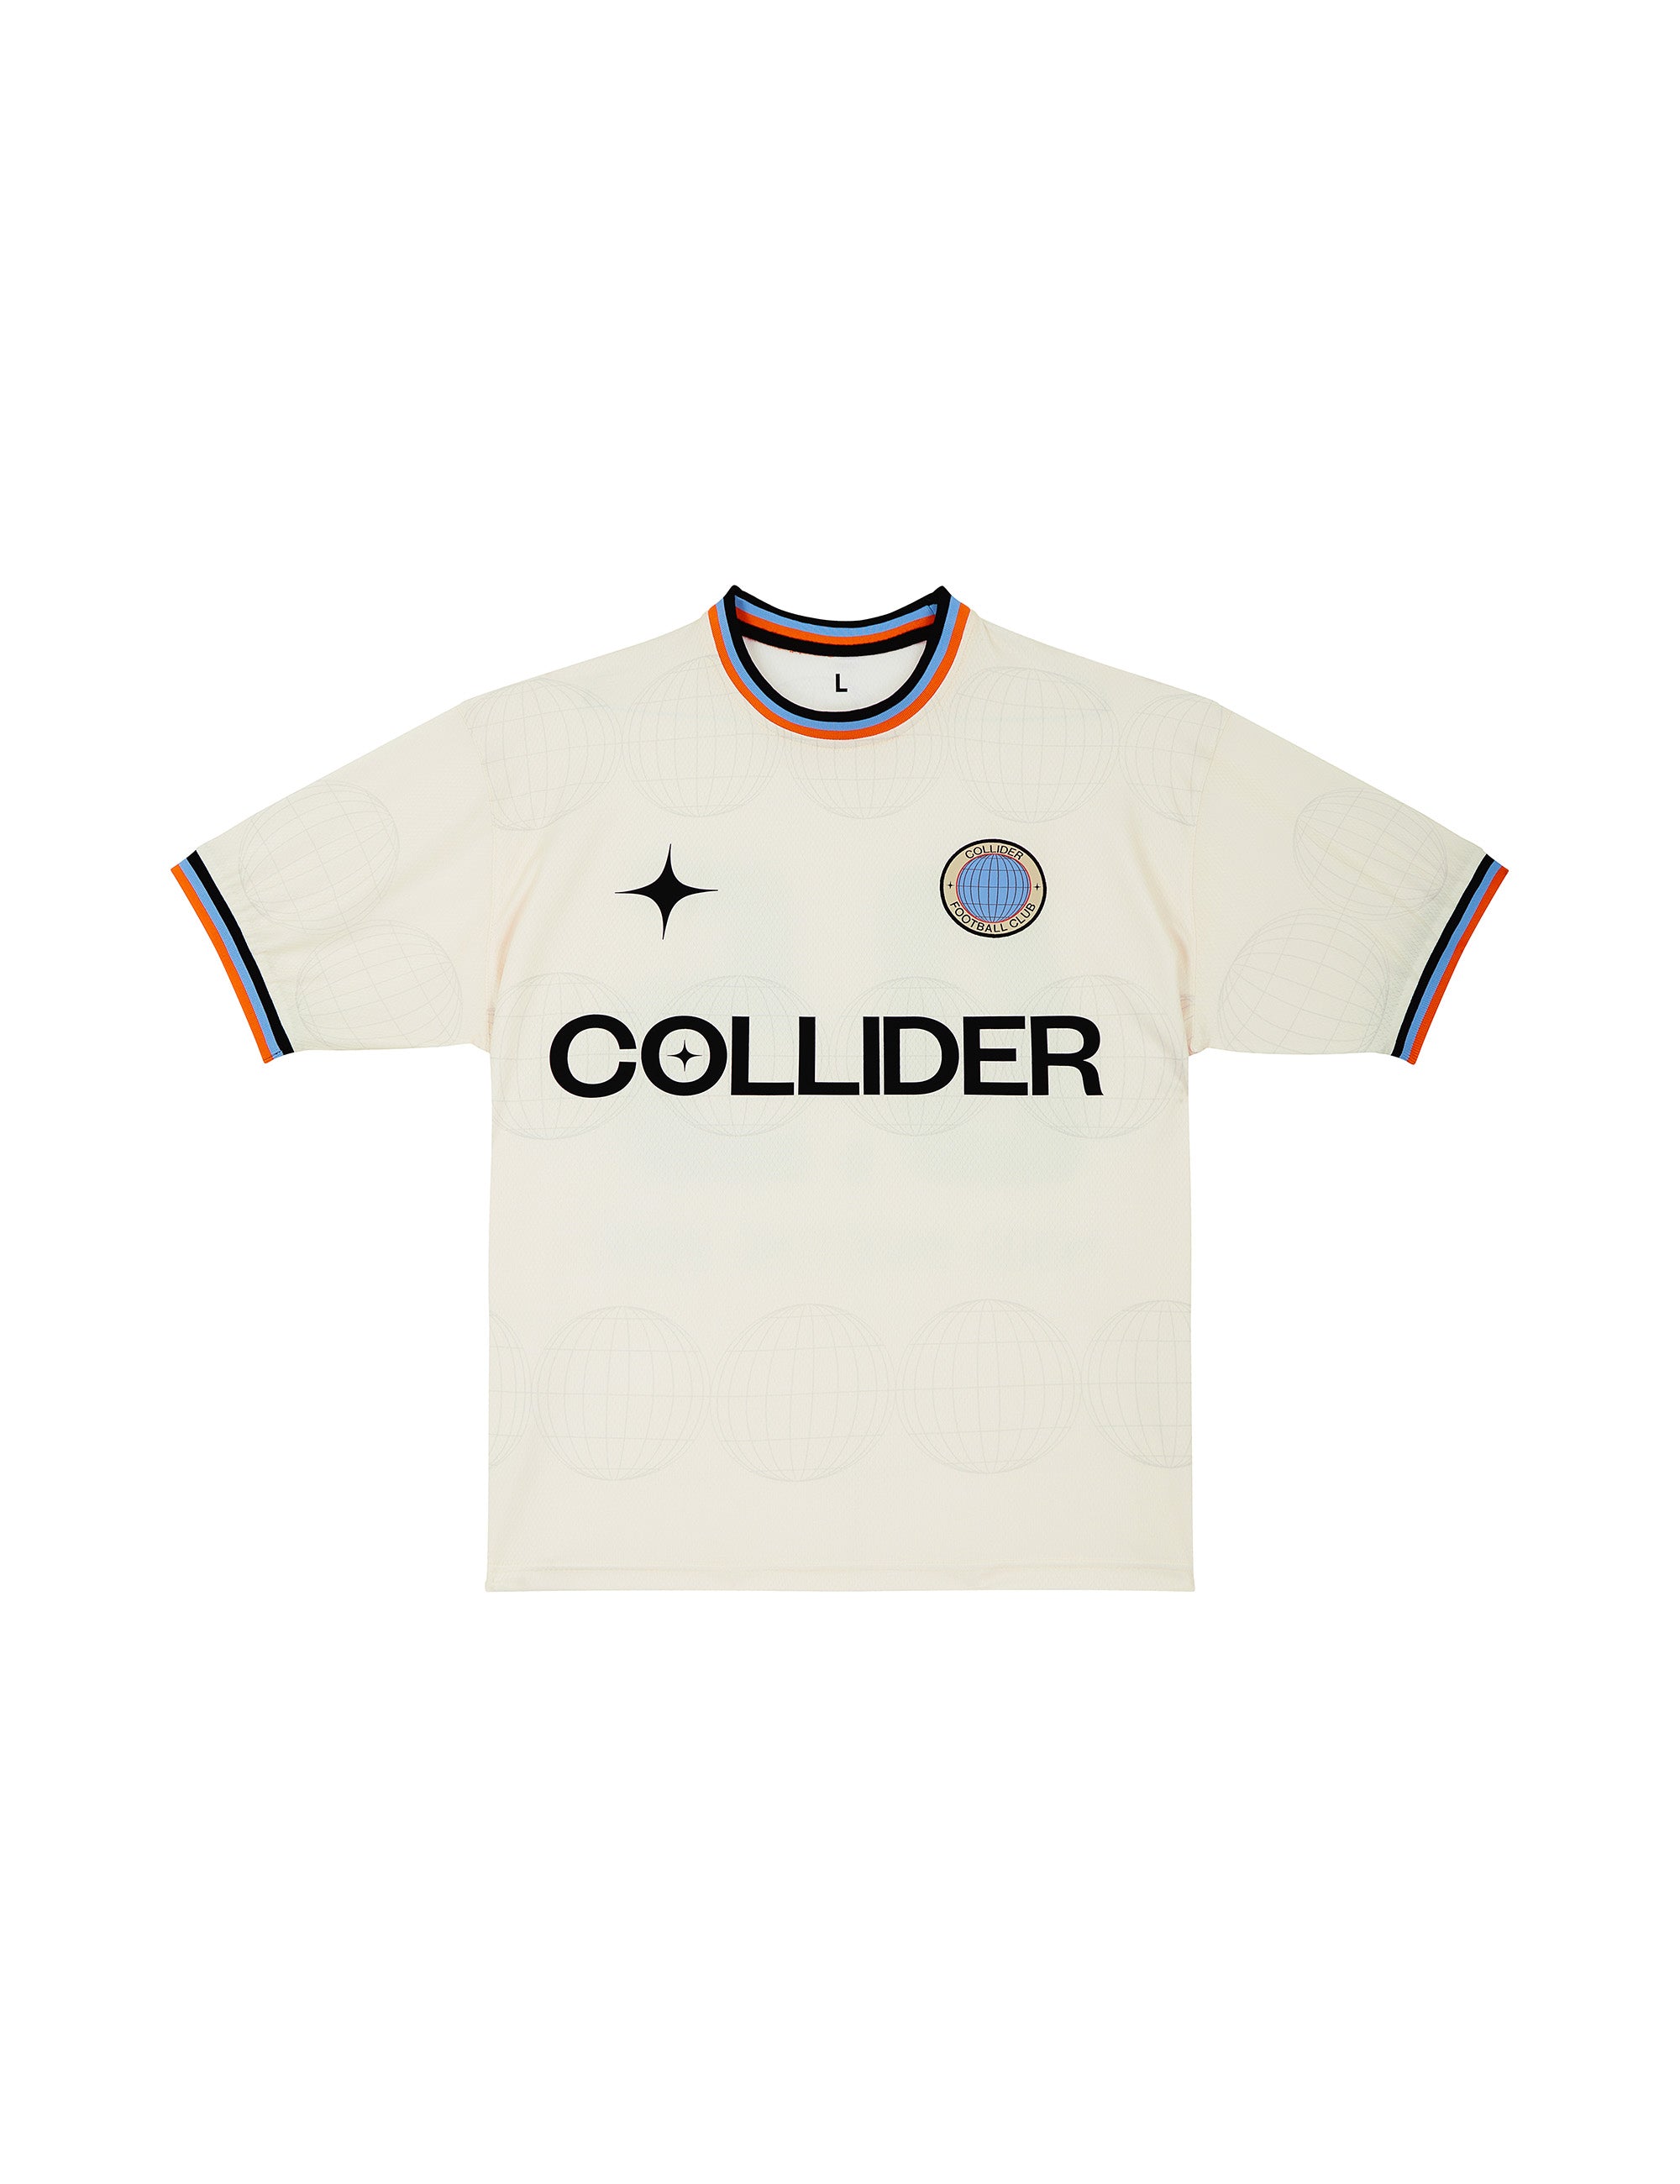 Introducing the Collider FC Home Shirt for the 2024 season. In collaboration with @fullkitwnkrs.